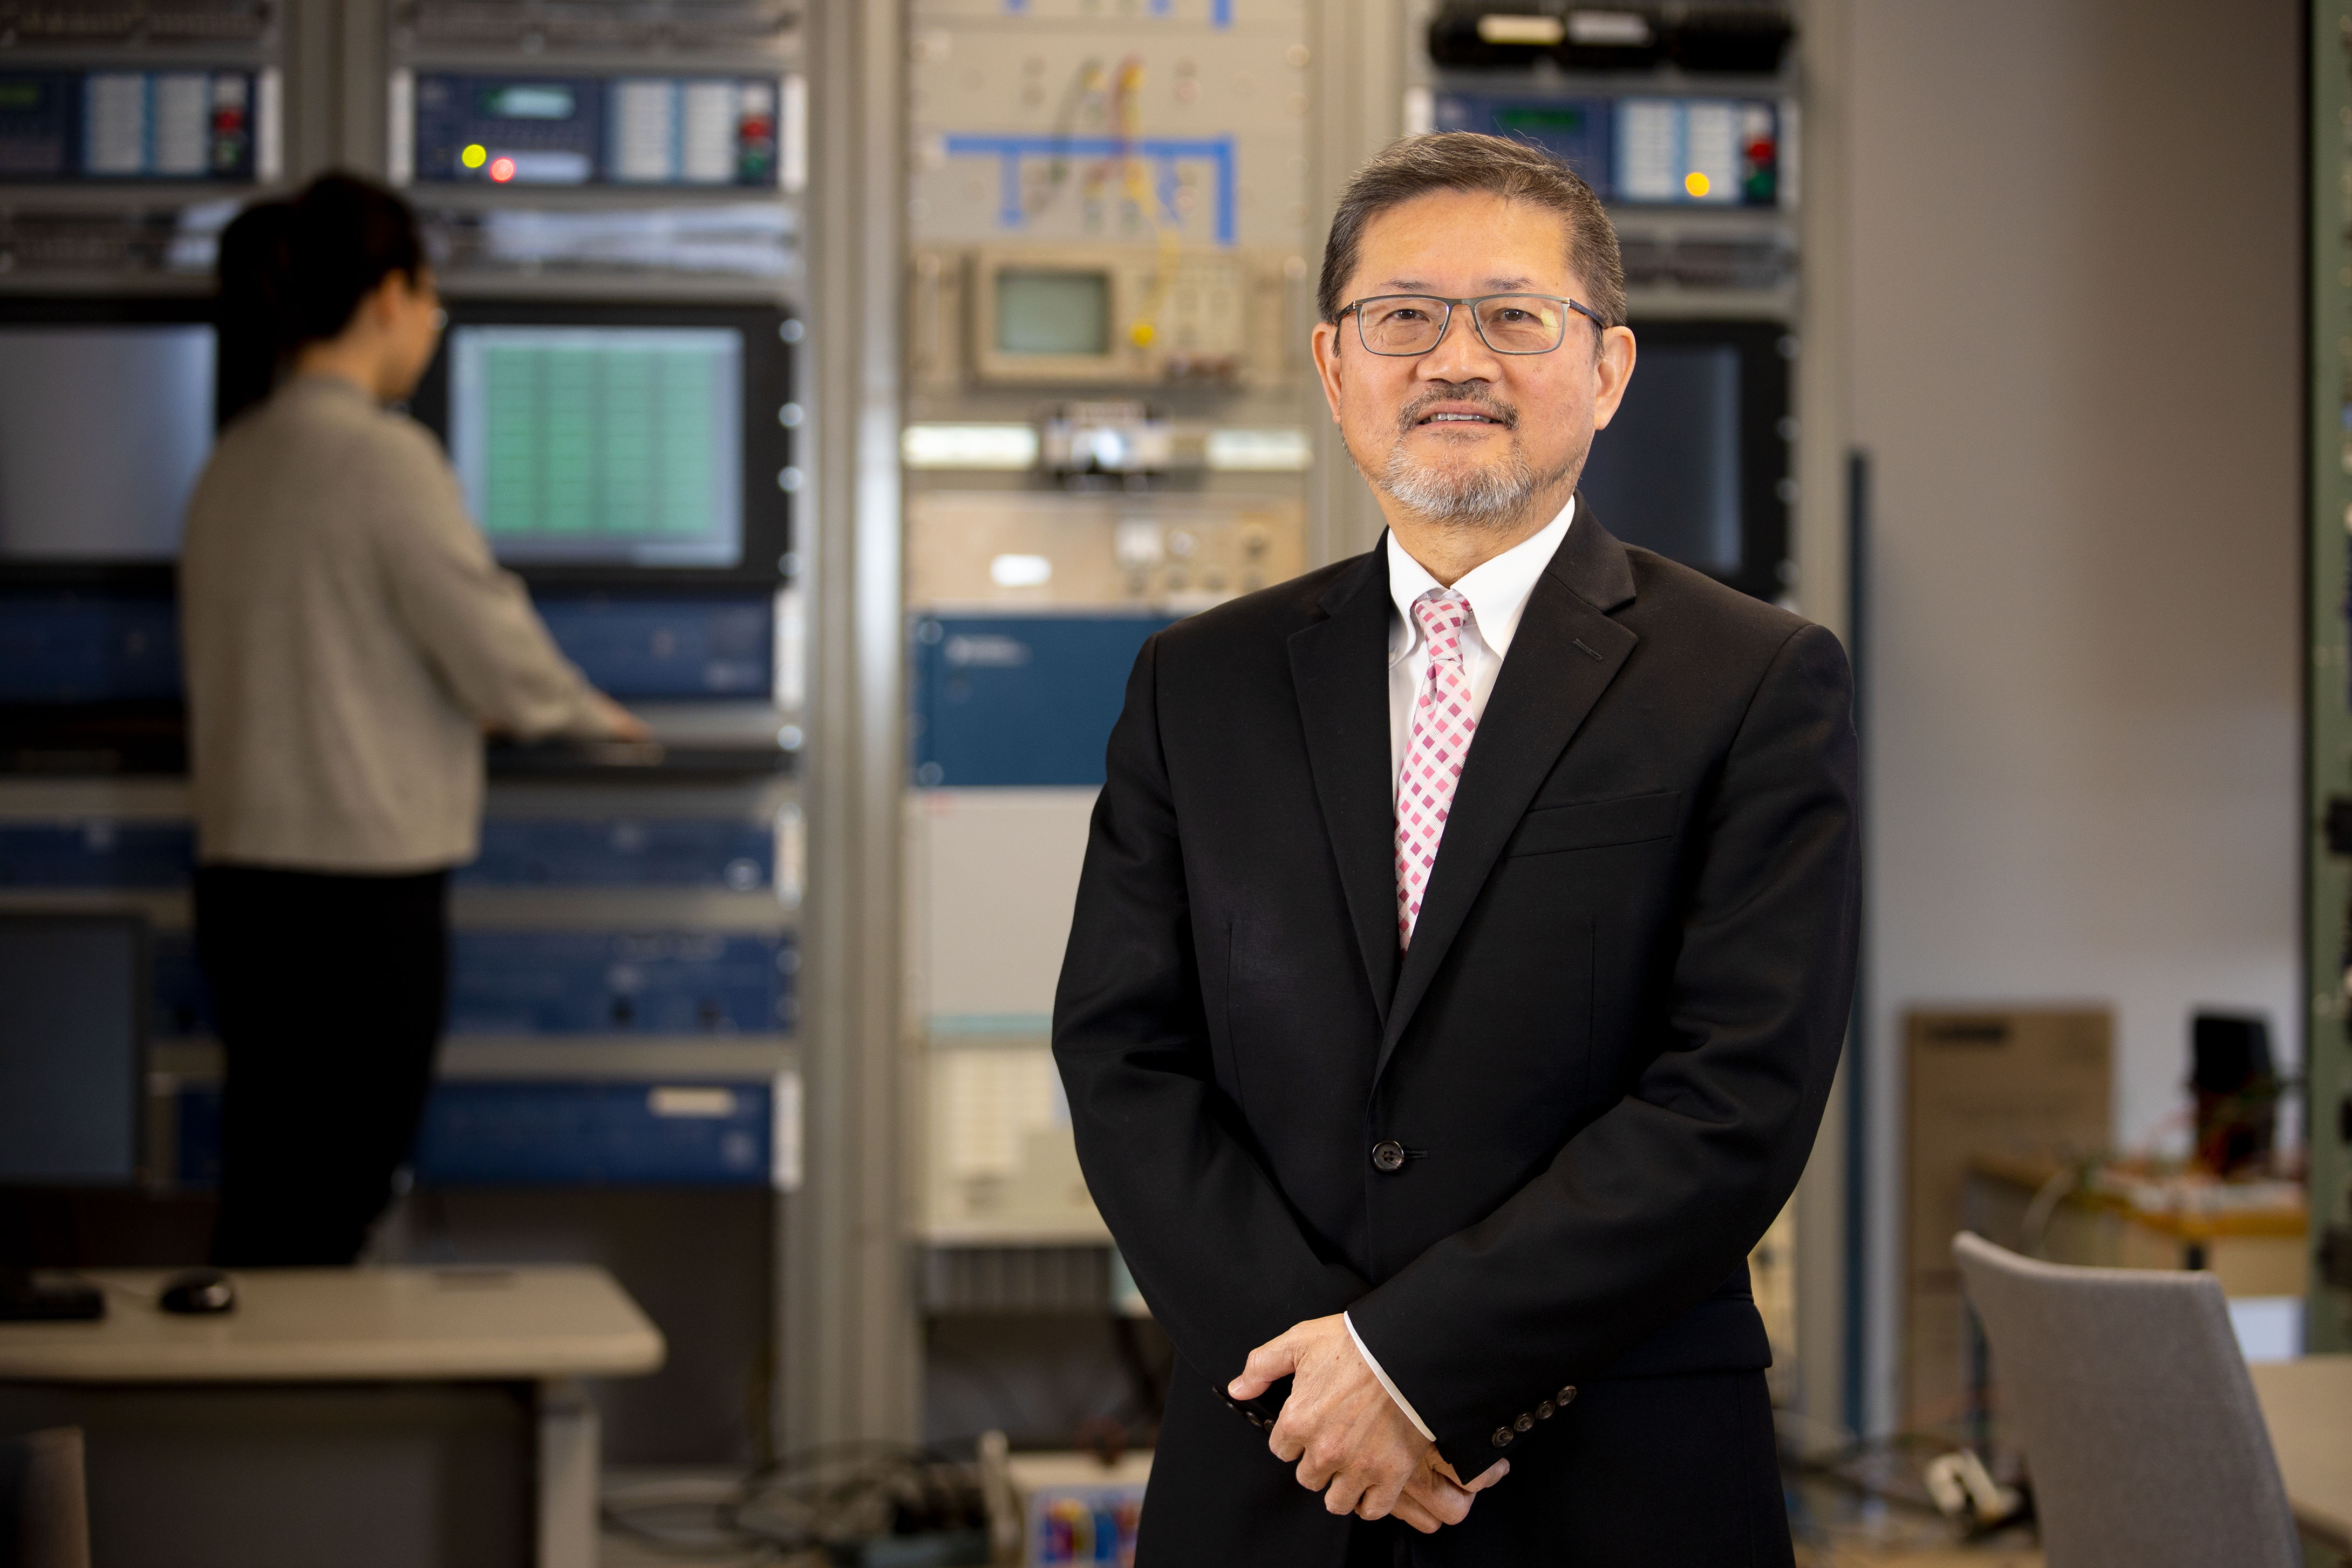 Chen-Ching Liu was recently elected to the National Academy of Engineering (NAE), one of the highest honors for engineers in the United States.